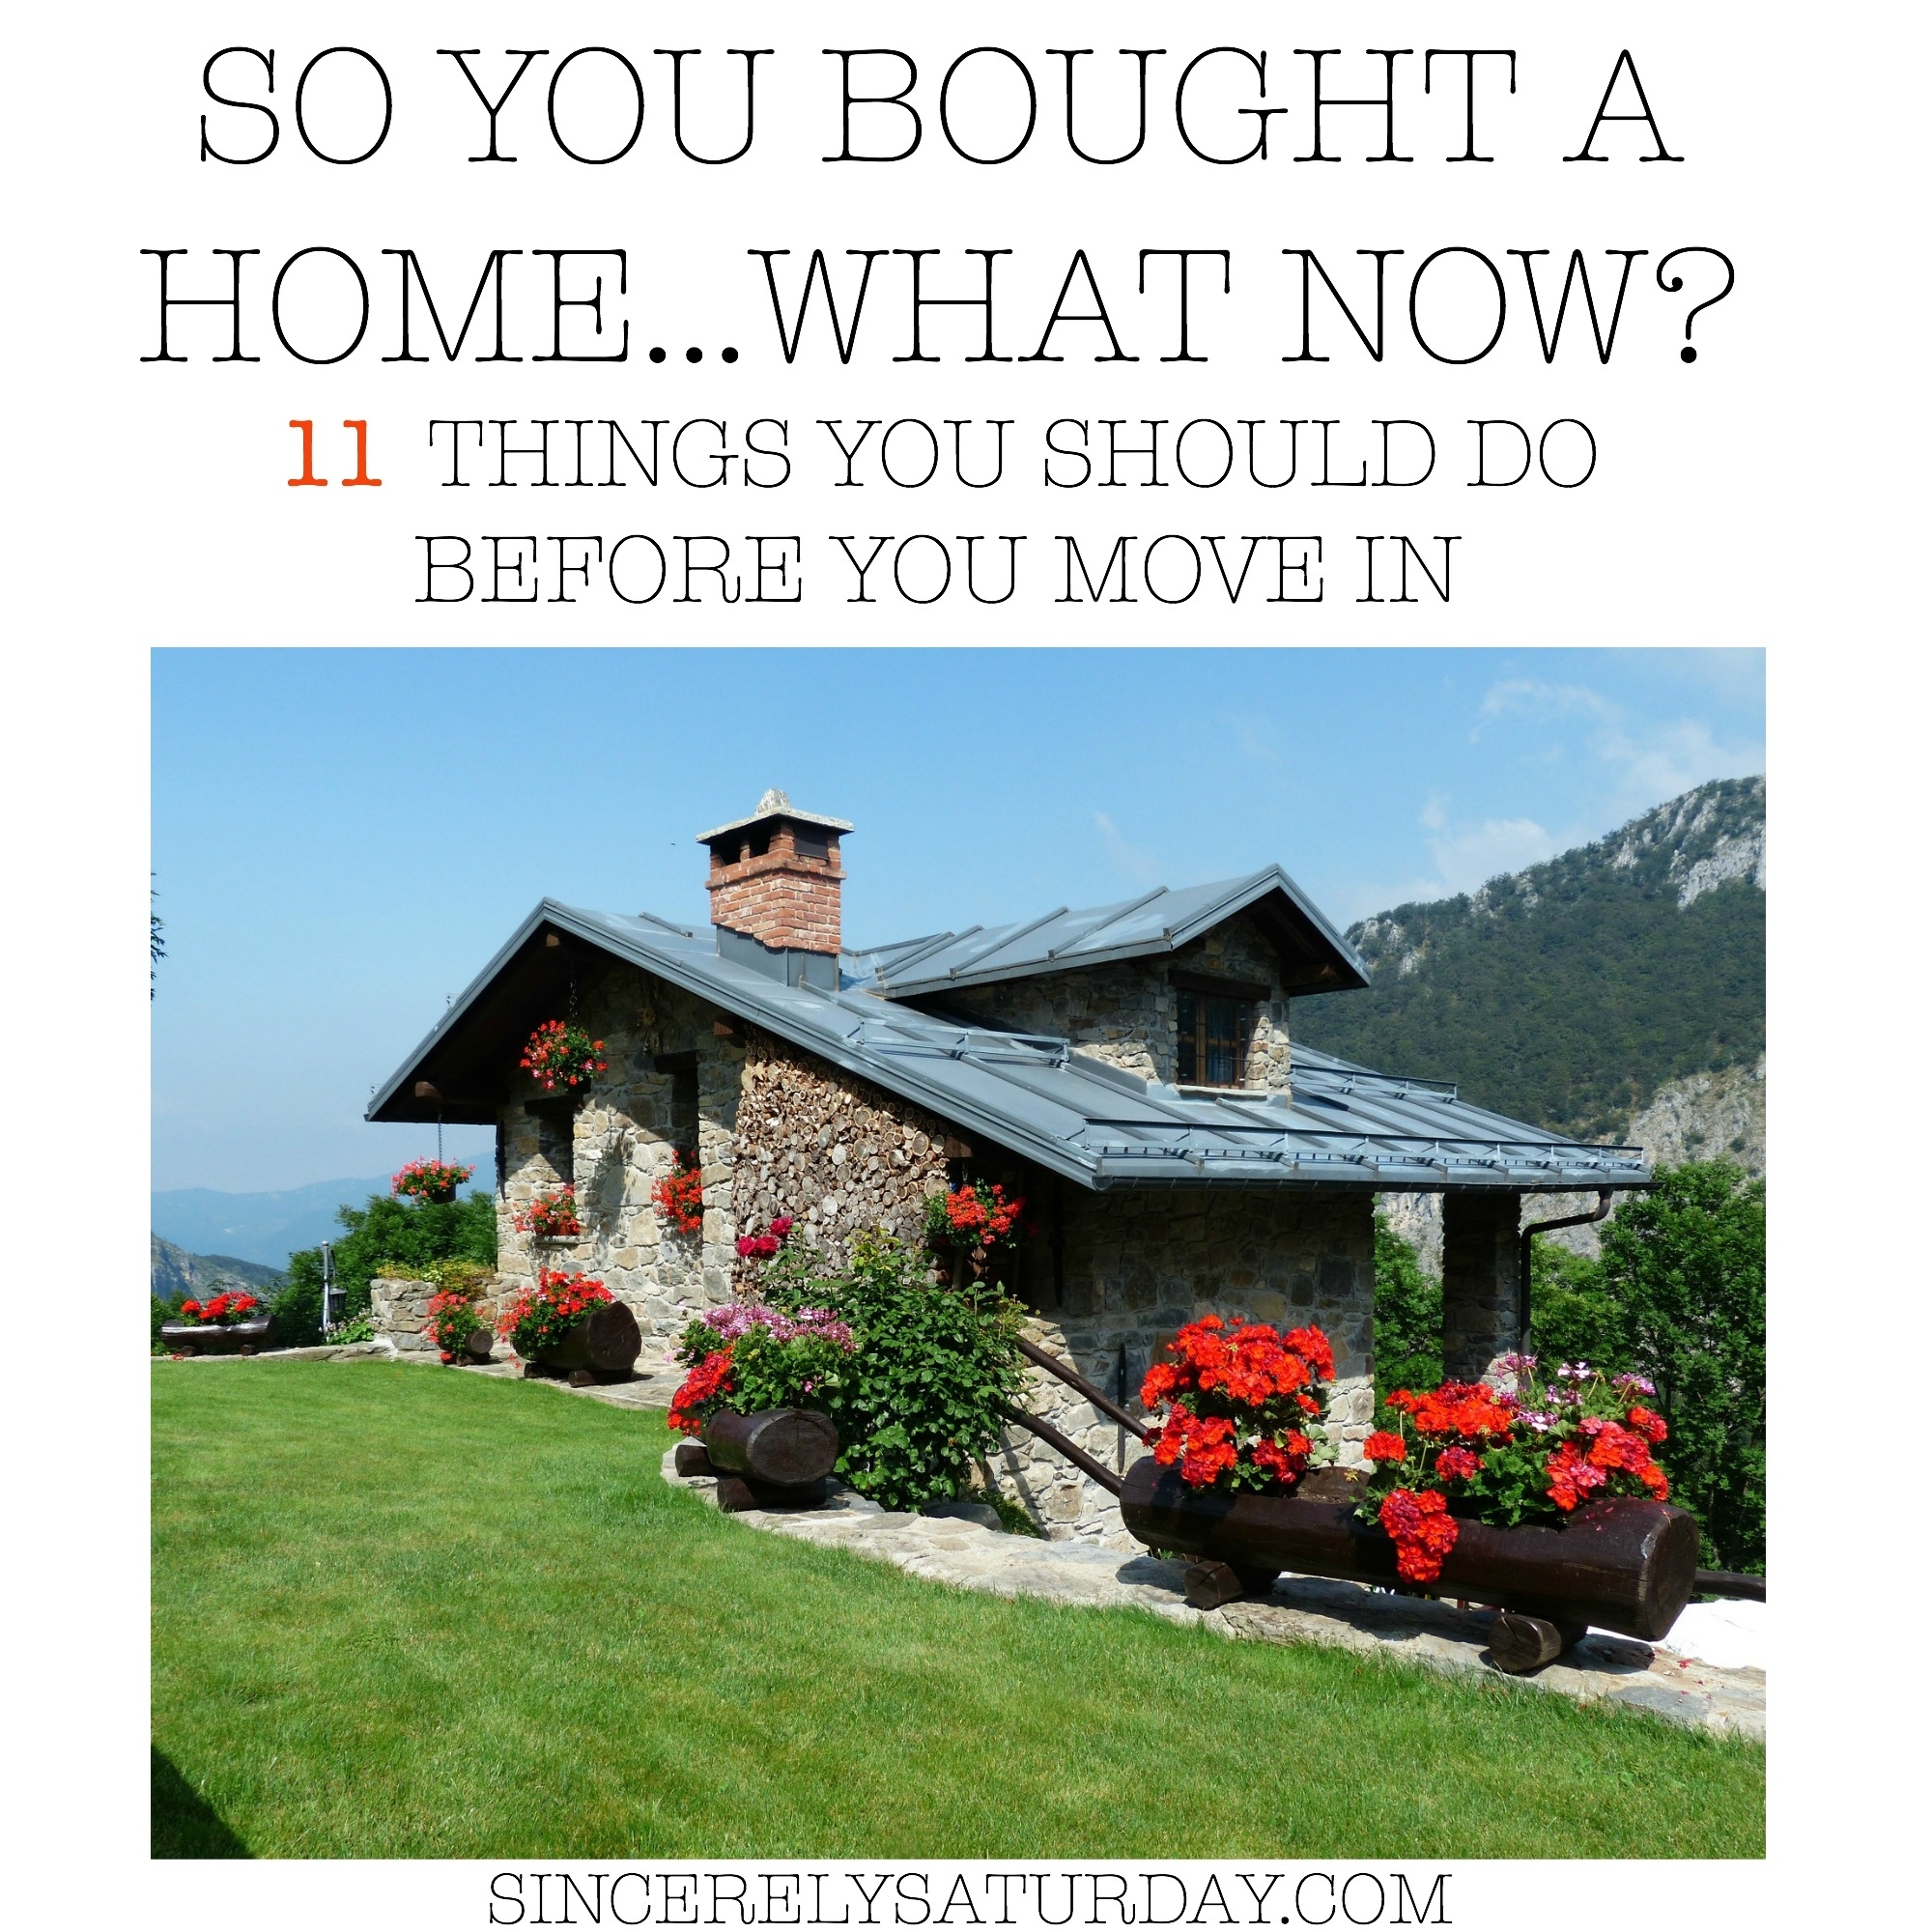 SO YOU BOUGHT A HOME...WHAT NOW? - 11 THINGS YOU SHOULD DO BEFORE YOU MOVE IN